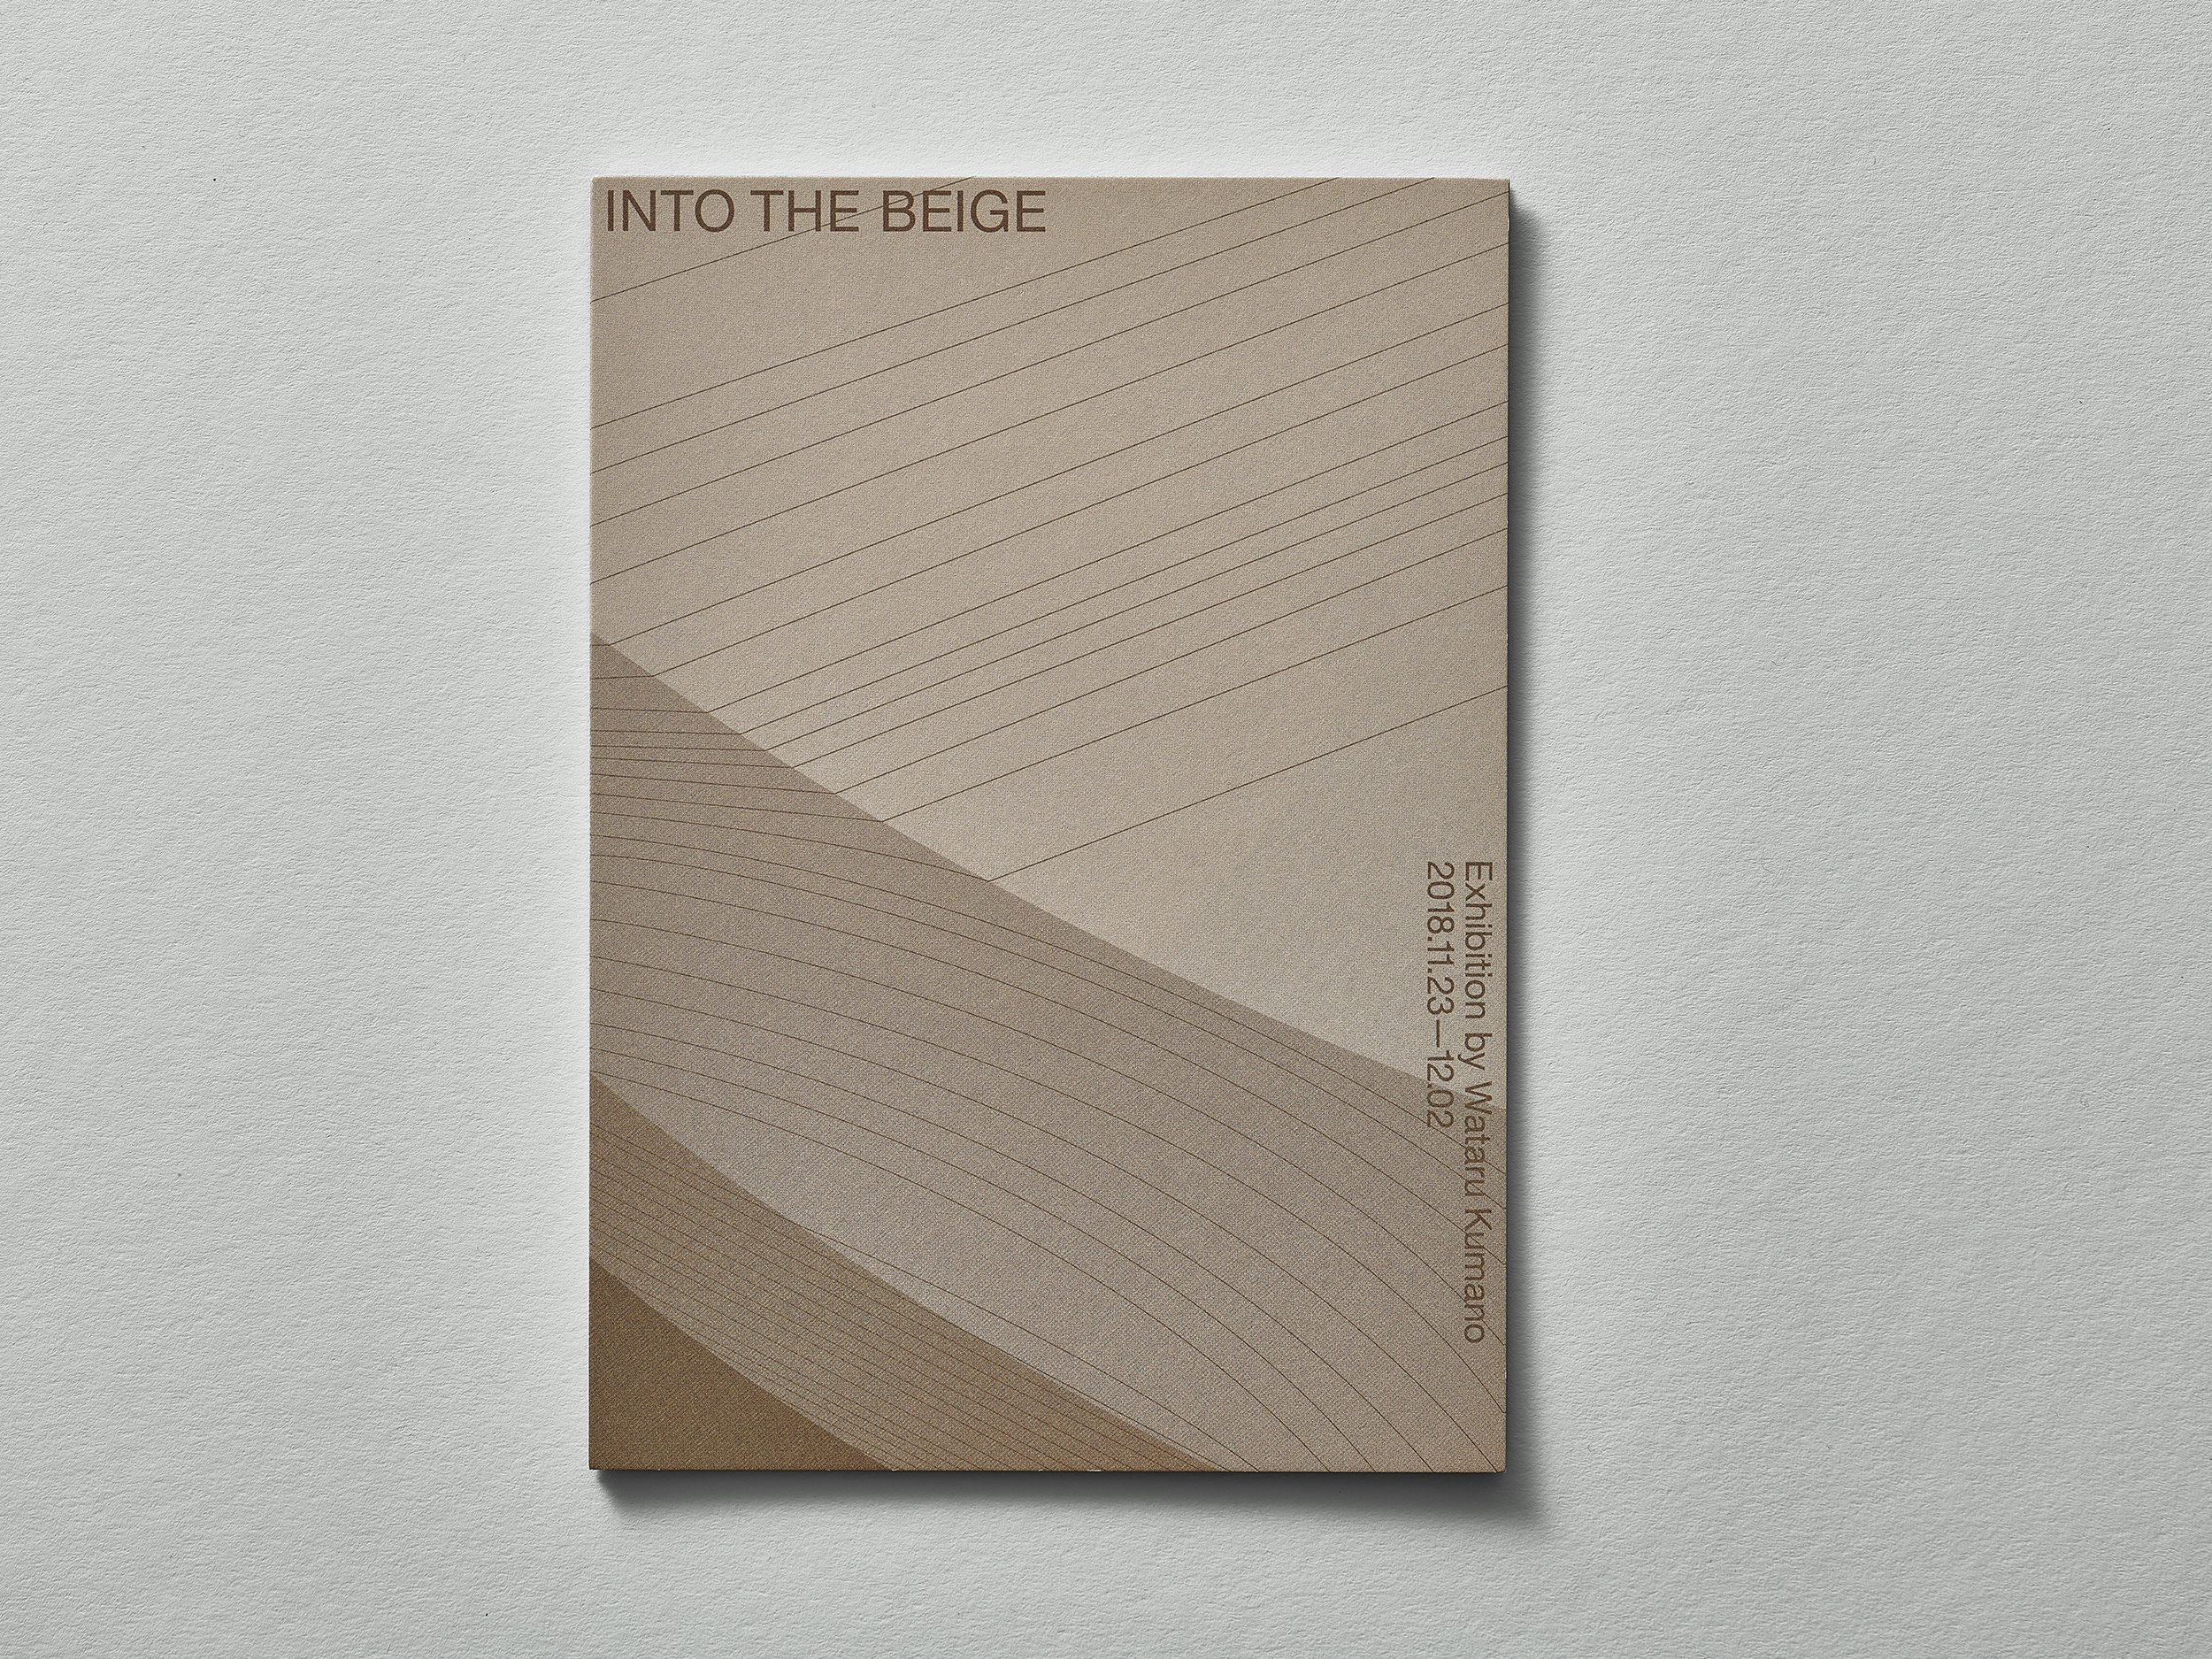 Into the Beige exhibition post card